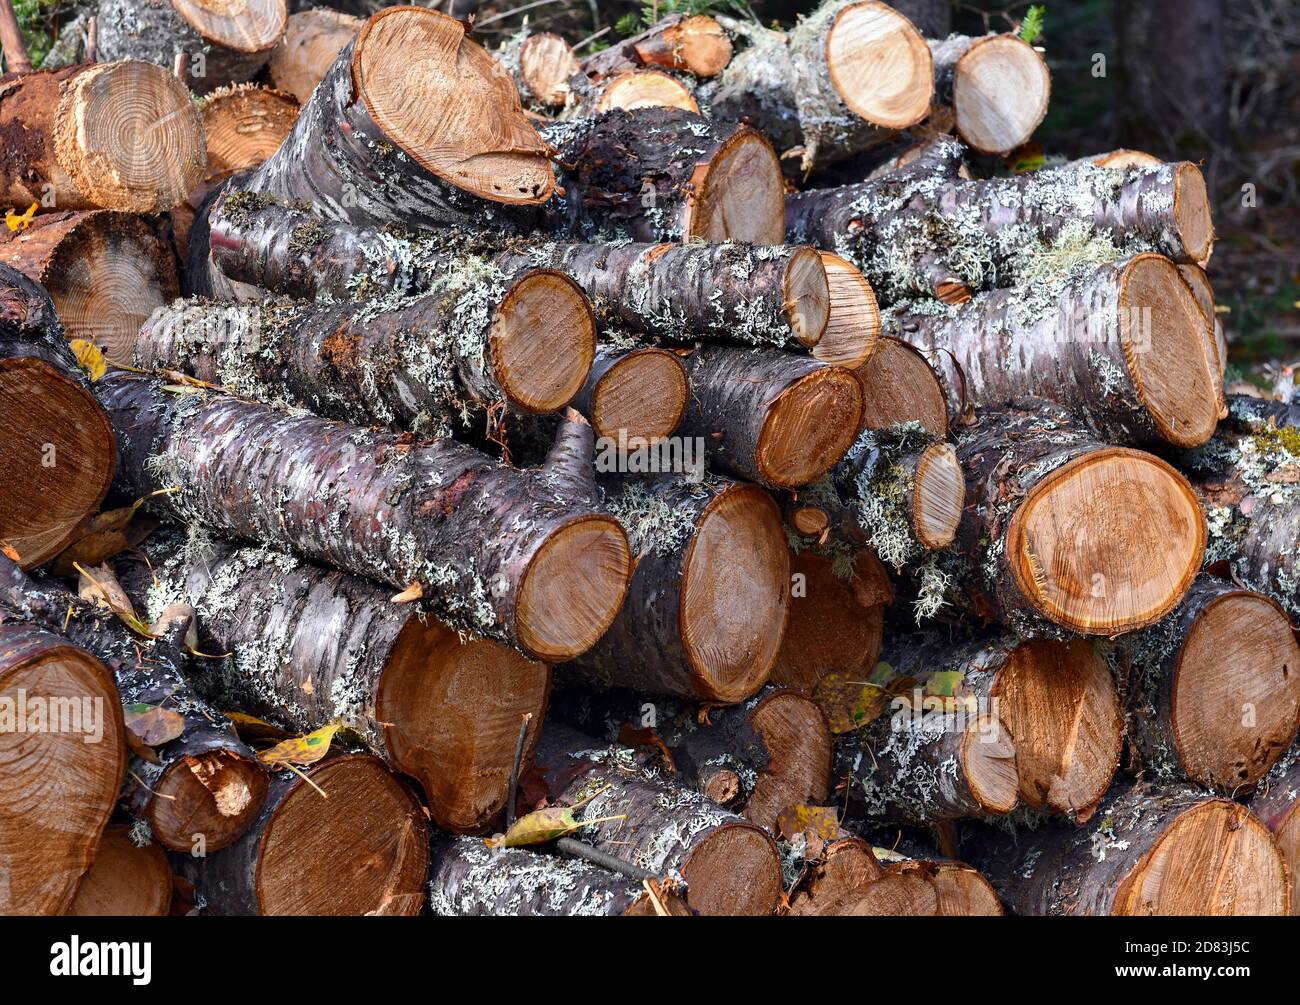 Woodpile of stacked firewood logs from cut trees Stock Photo